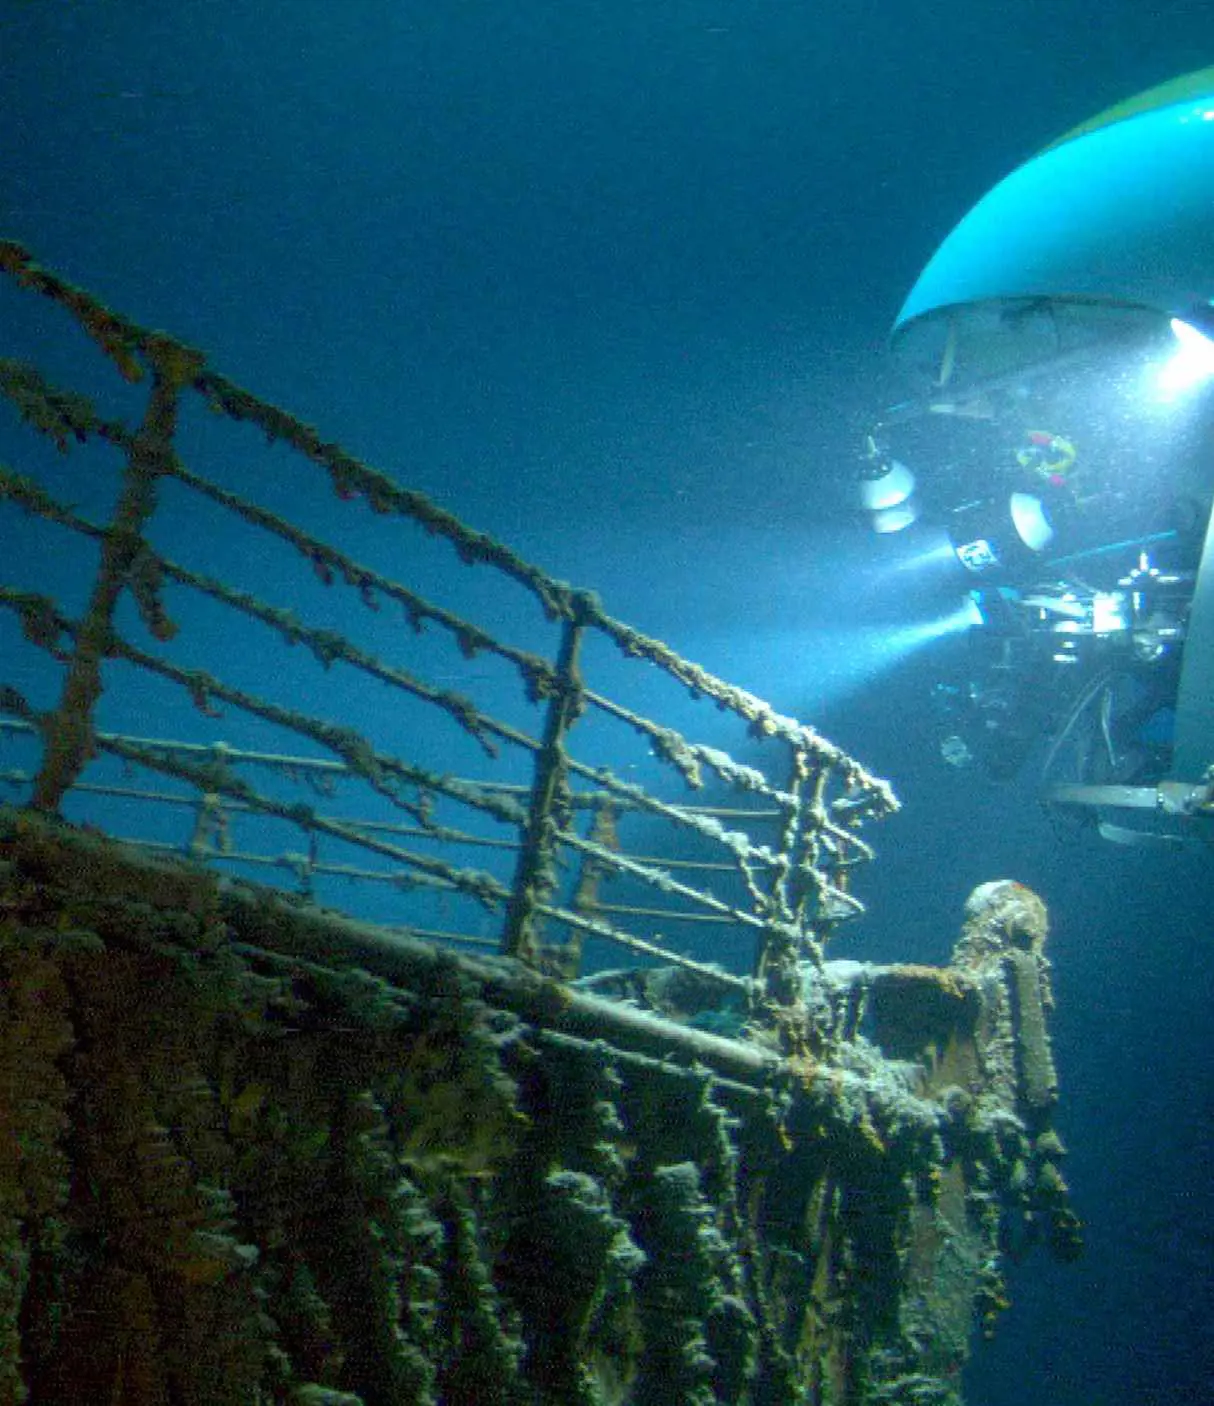 A MIR submersible observing the bow of the Titanic in 2003